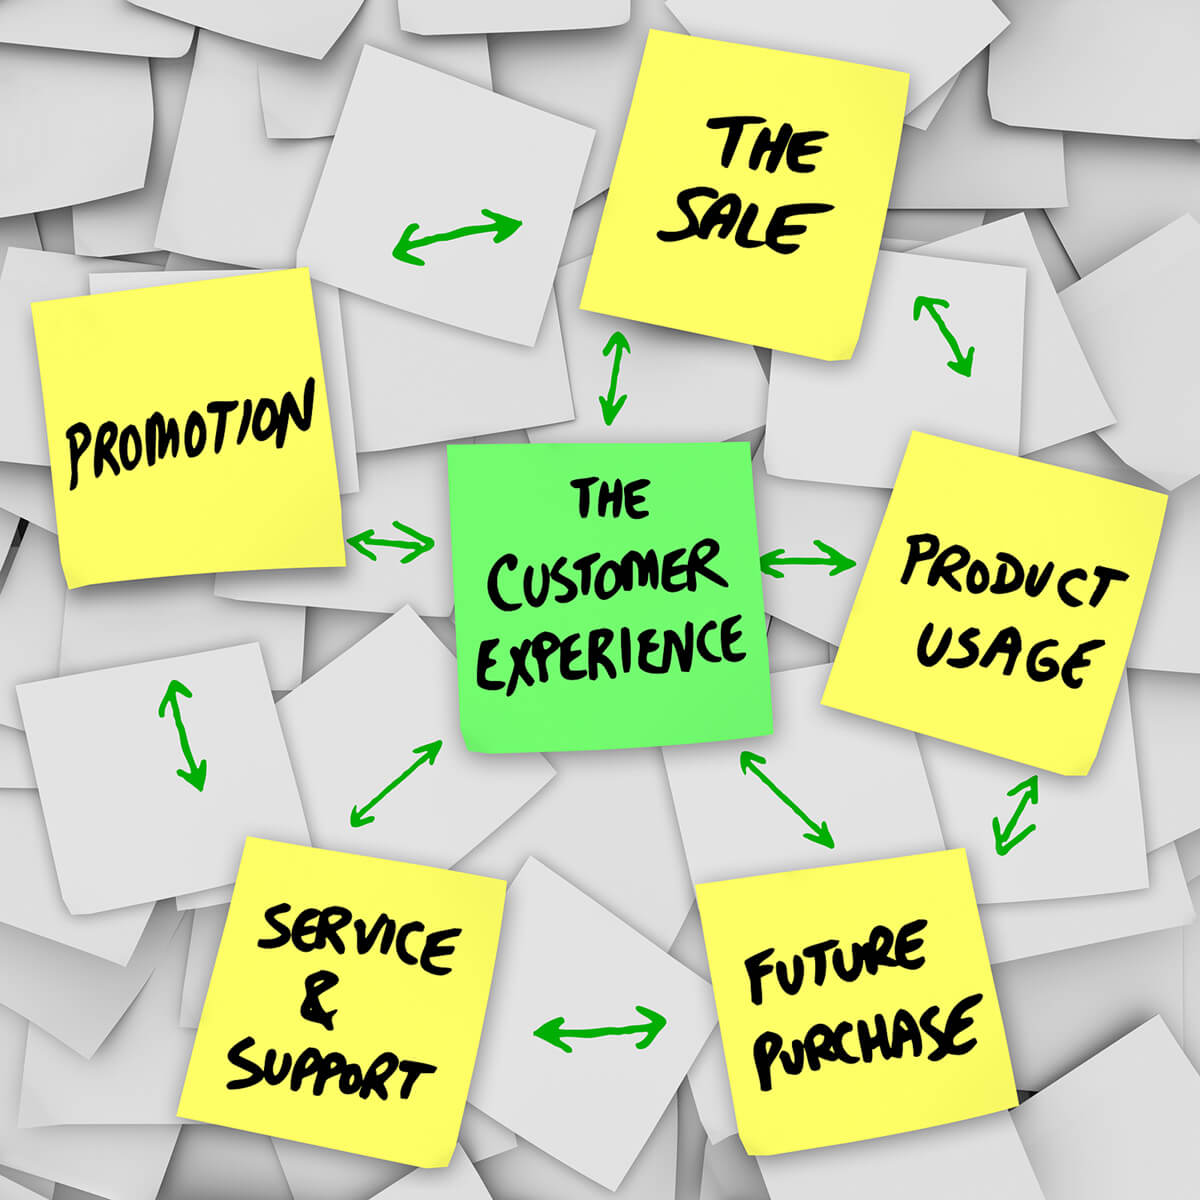 THE CUSTOMER EXPERIENCE: Promotion, Sale, Product Usage, Future Purchase, Service & Support